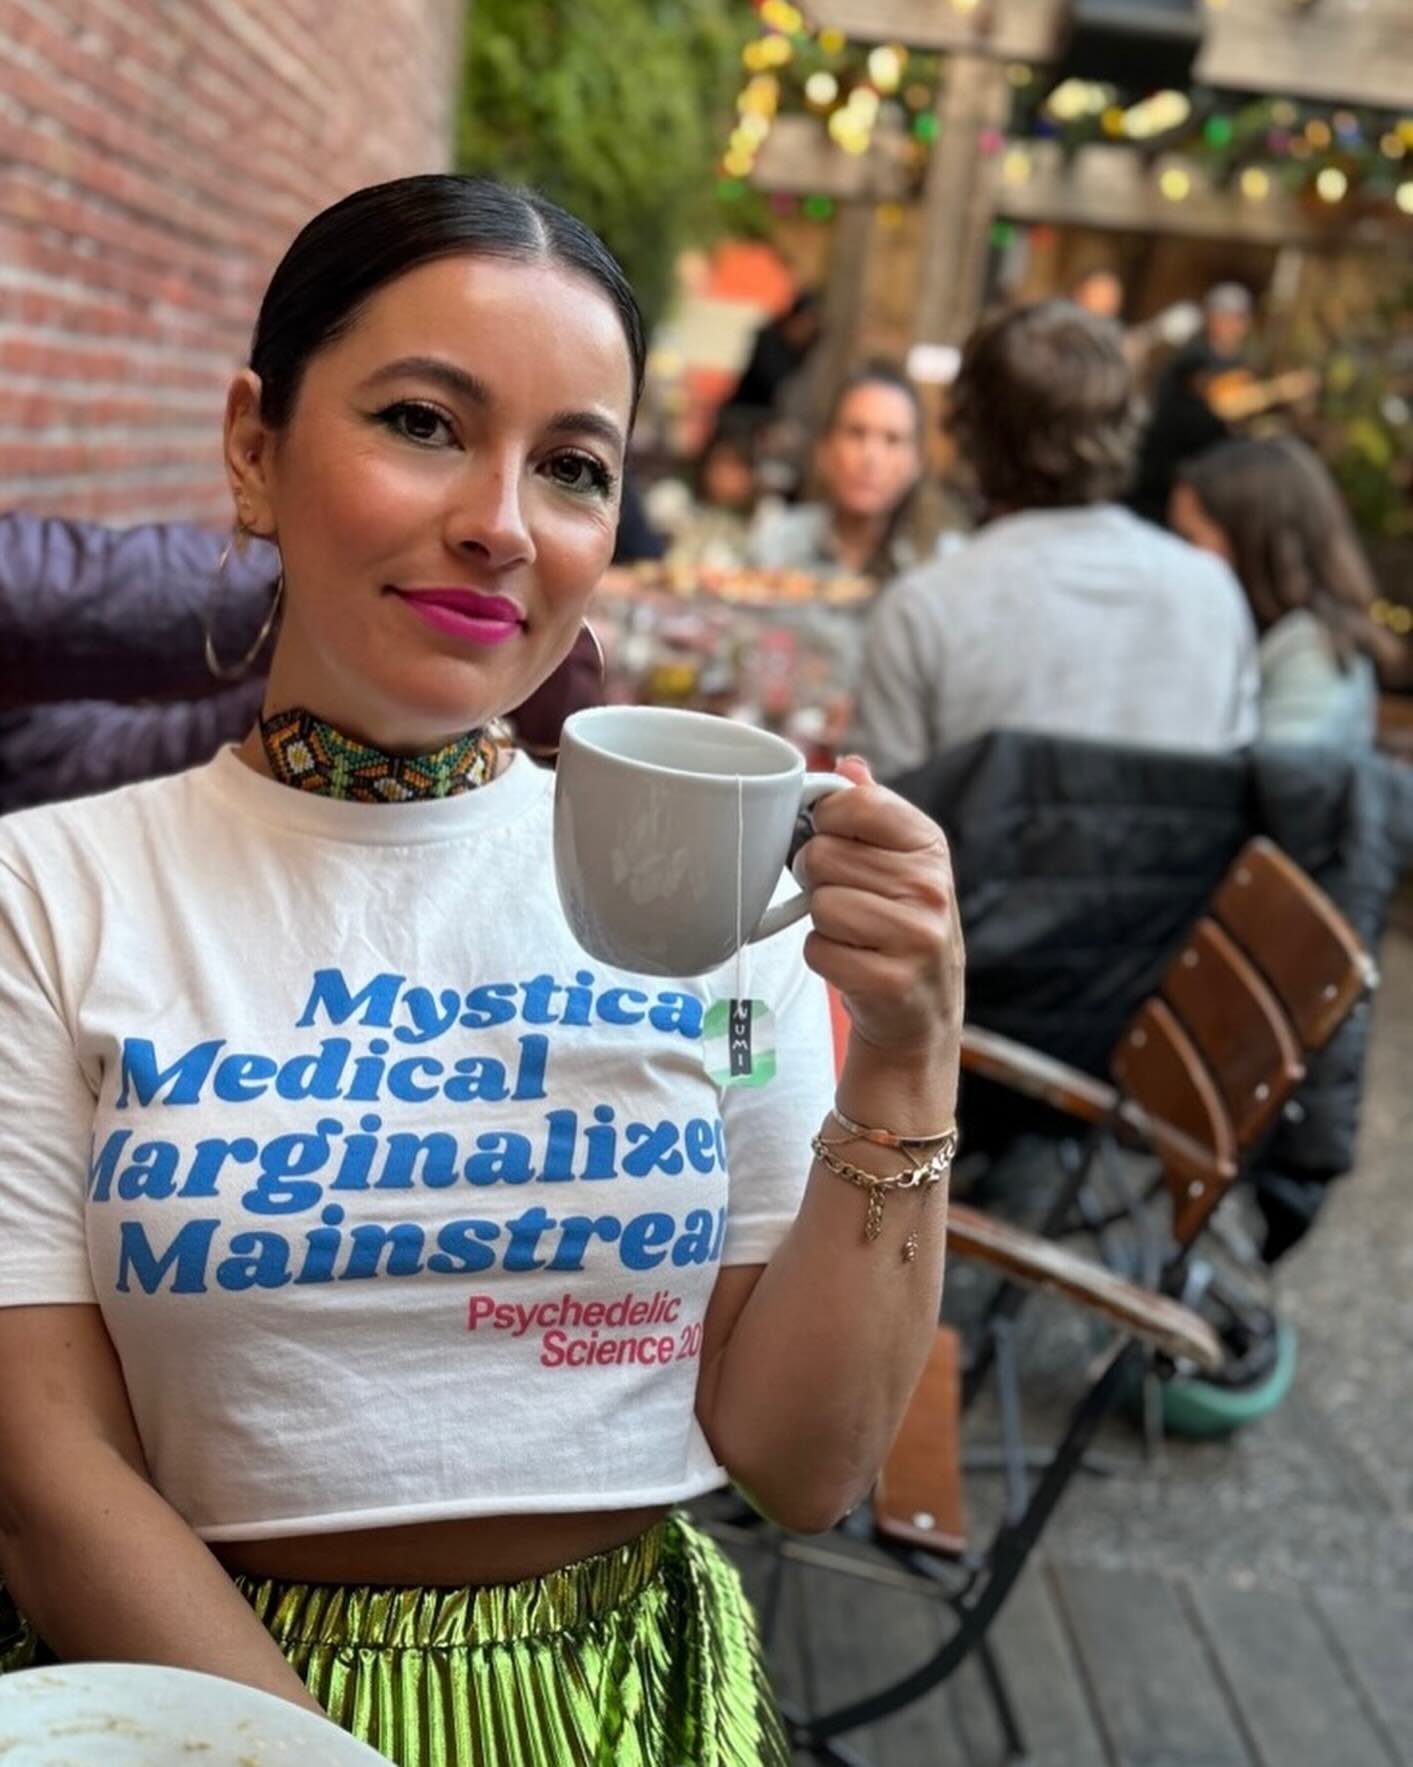 Cheers ☕️ to @maps__org&rsquo;s 38th birthday🙌✨ A mission dedicated &ldquo;&hellip;to create a society where psychedelics are legally &amp; equitably accessible for healing, personal growth, spirituality, and celebratory purposes&hellip;&amp; to rig